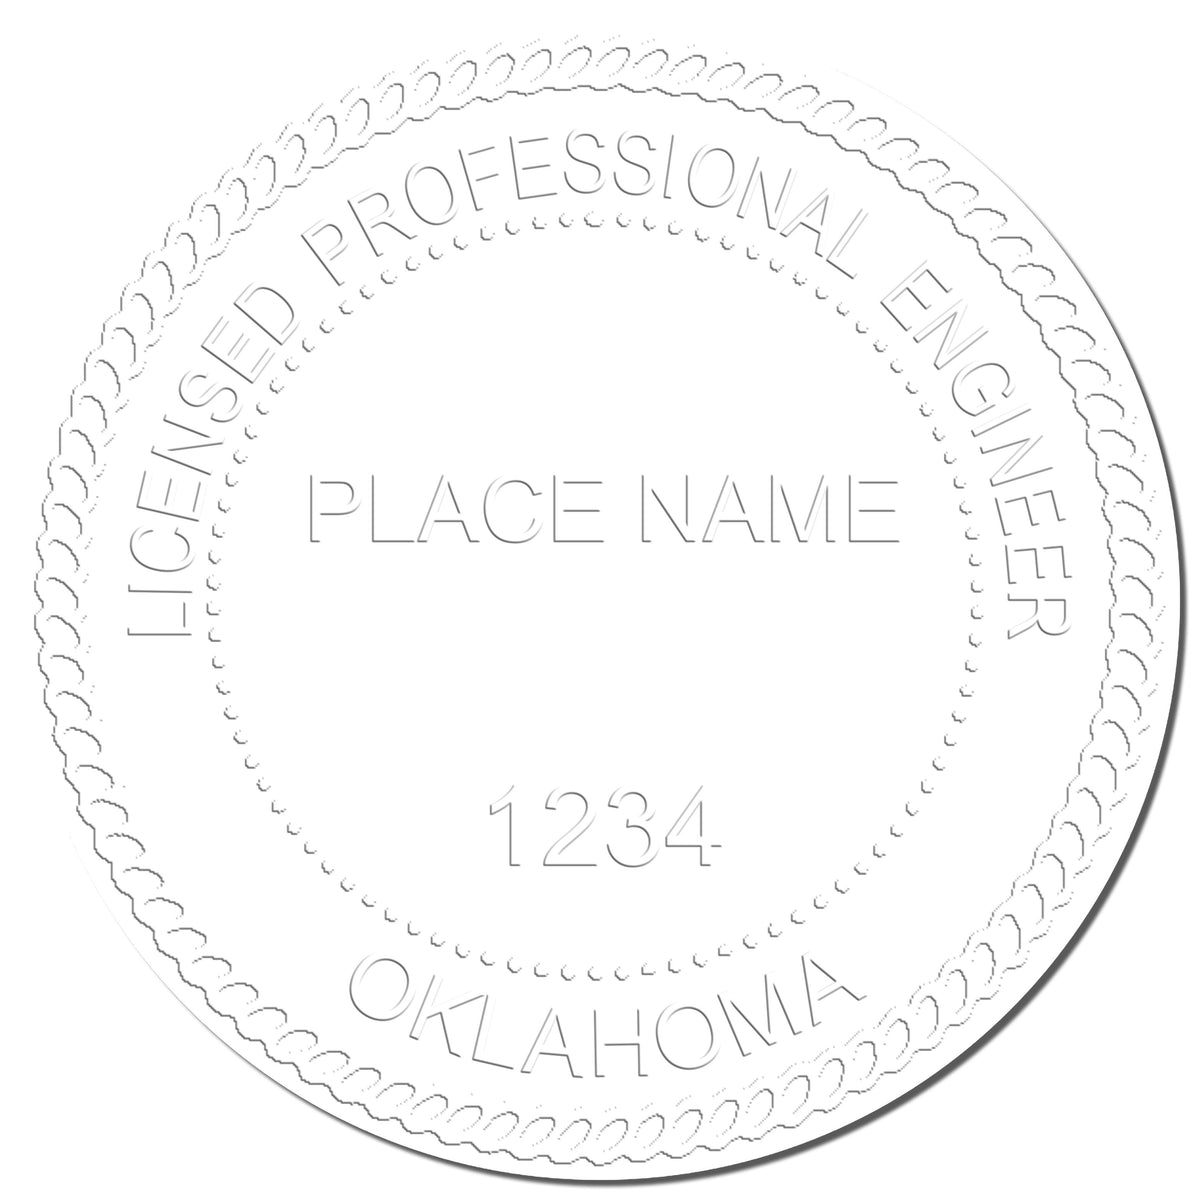 This paper is stamped with a sample imprint of the Heavy Duty Cast Iron Oklahoma Engineer Seal Embosser, signifying its quality and reliability.